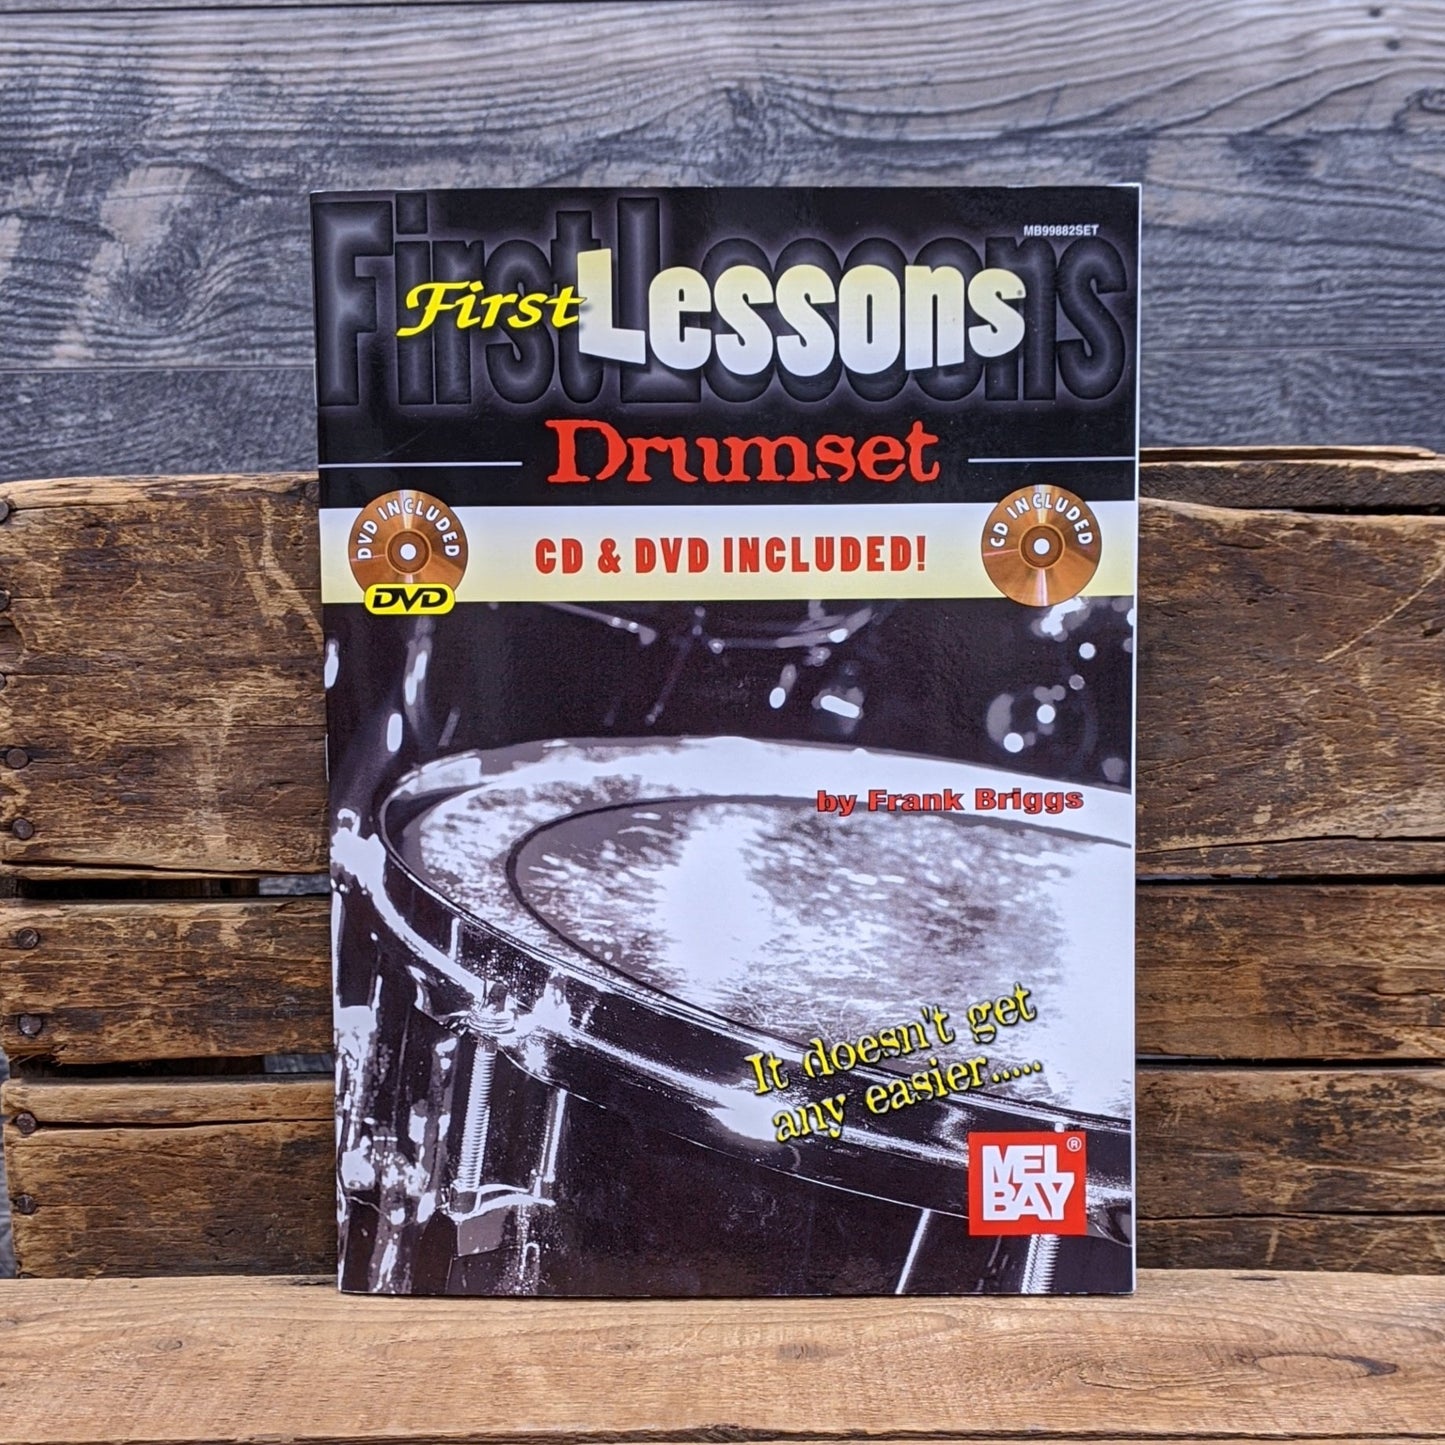 Mel Bay - First Lessons for Drumset by Frank Briggs - CD and DVD included!